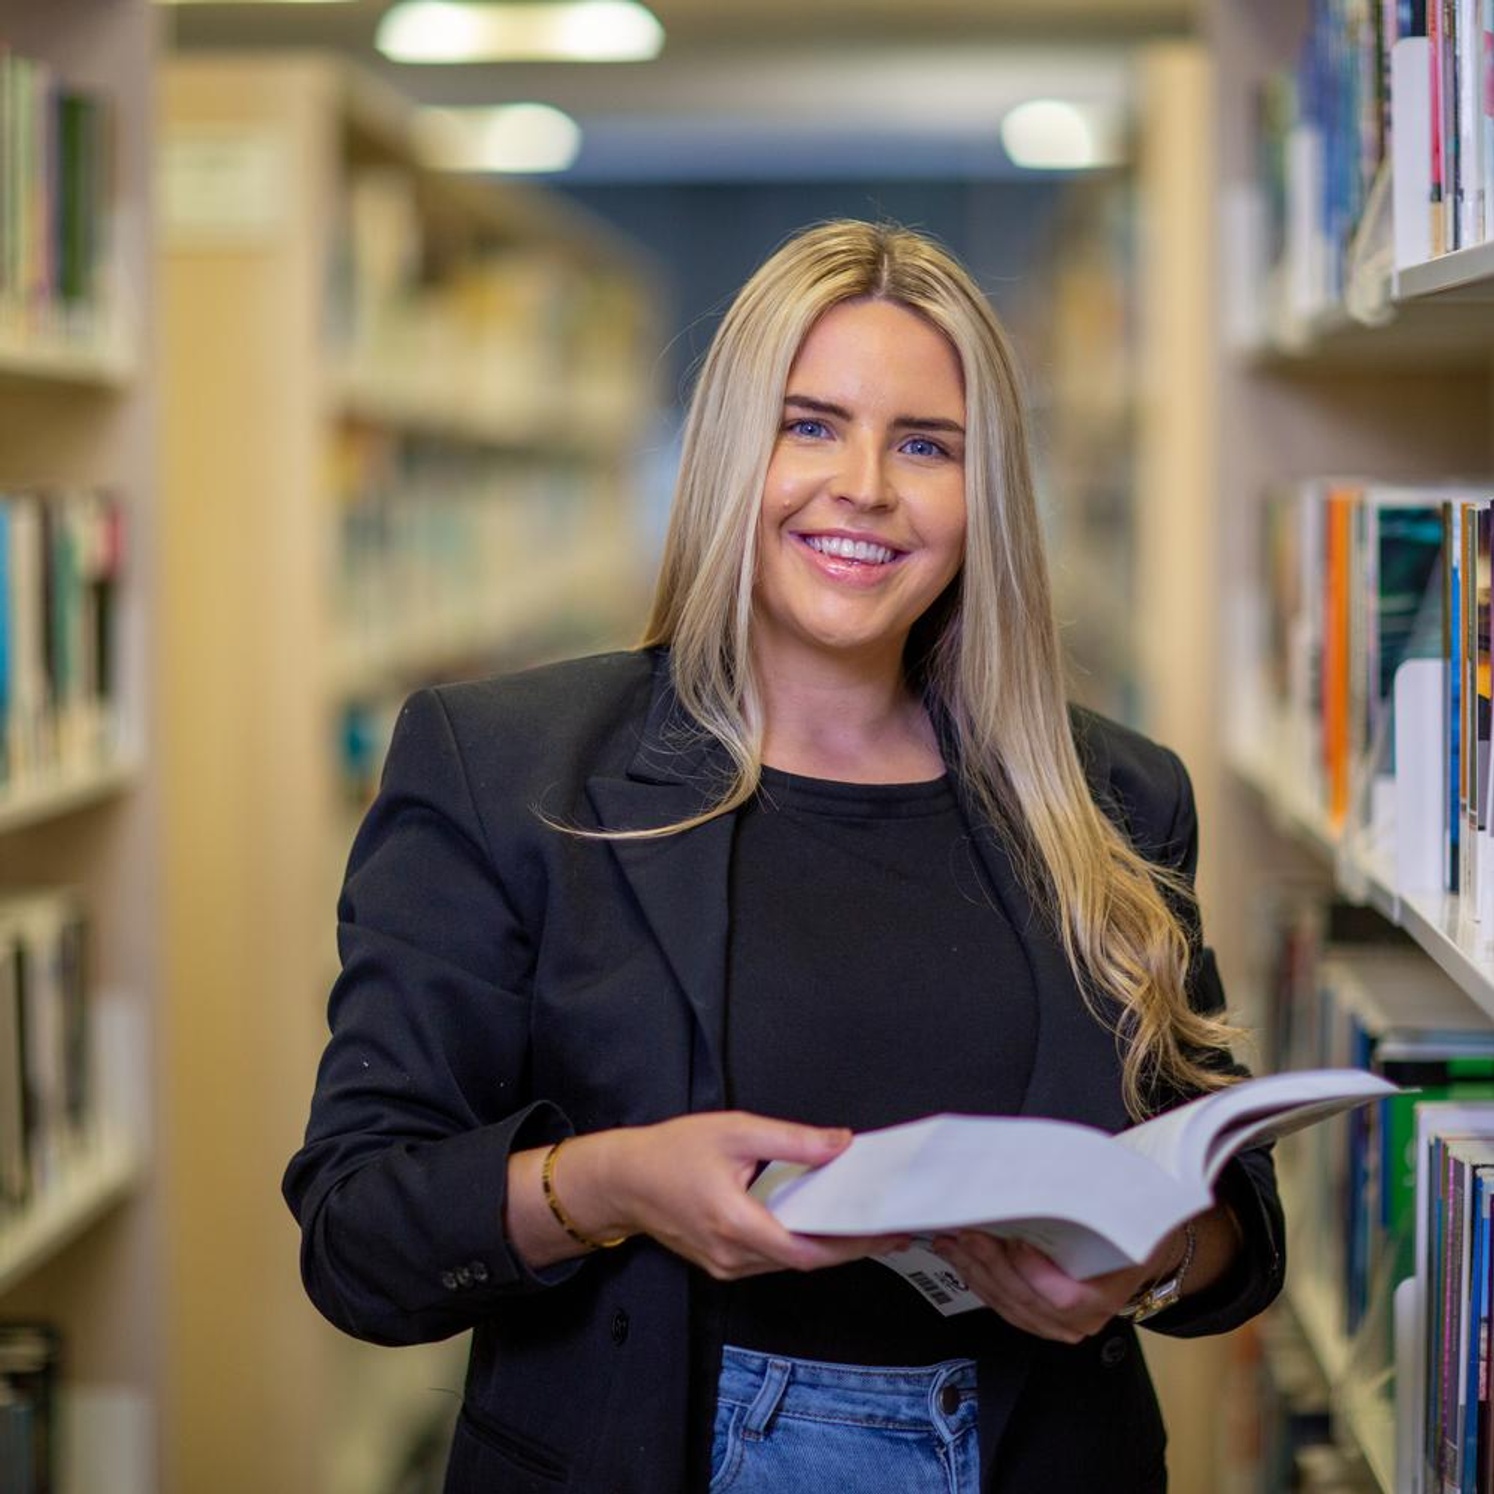 student in library with book